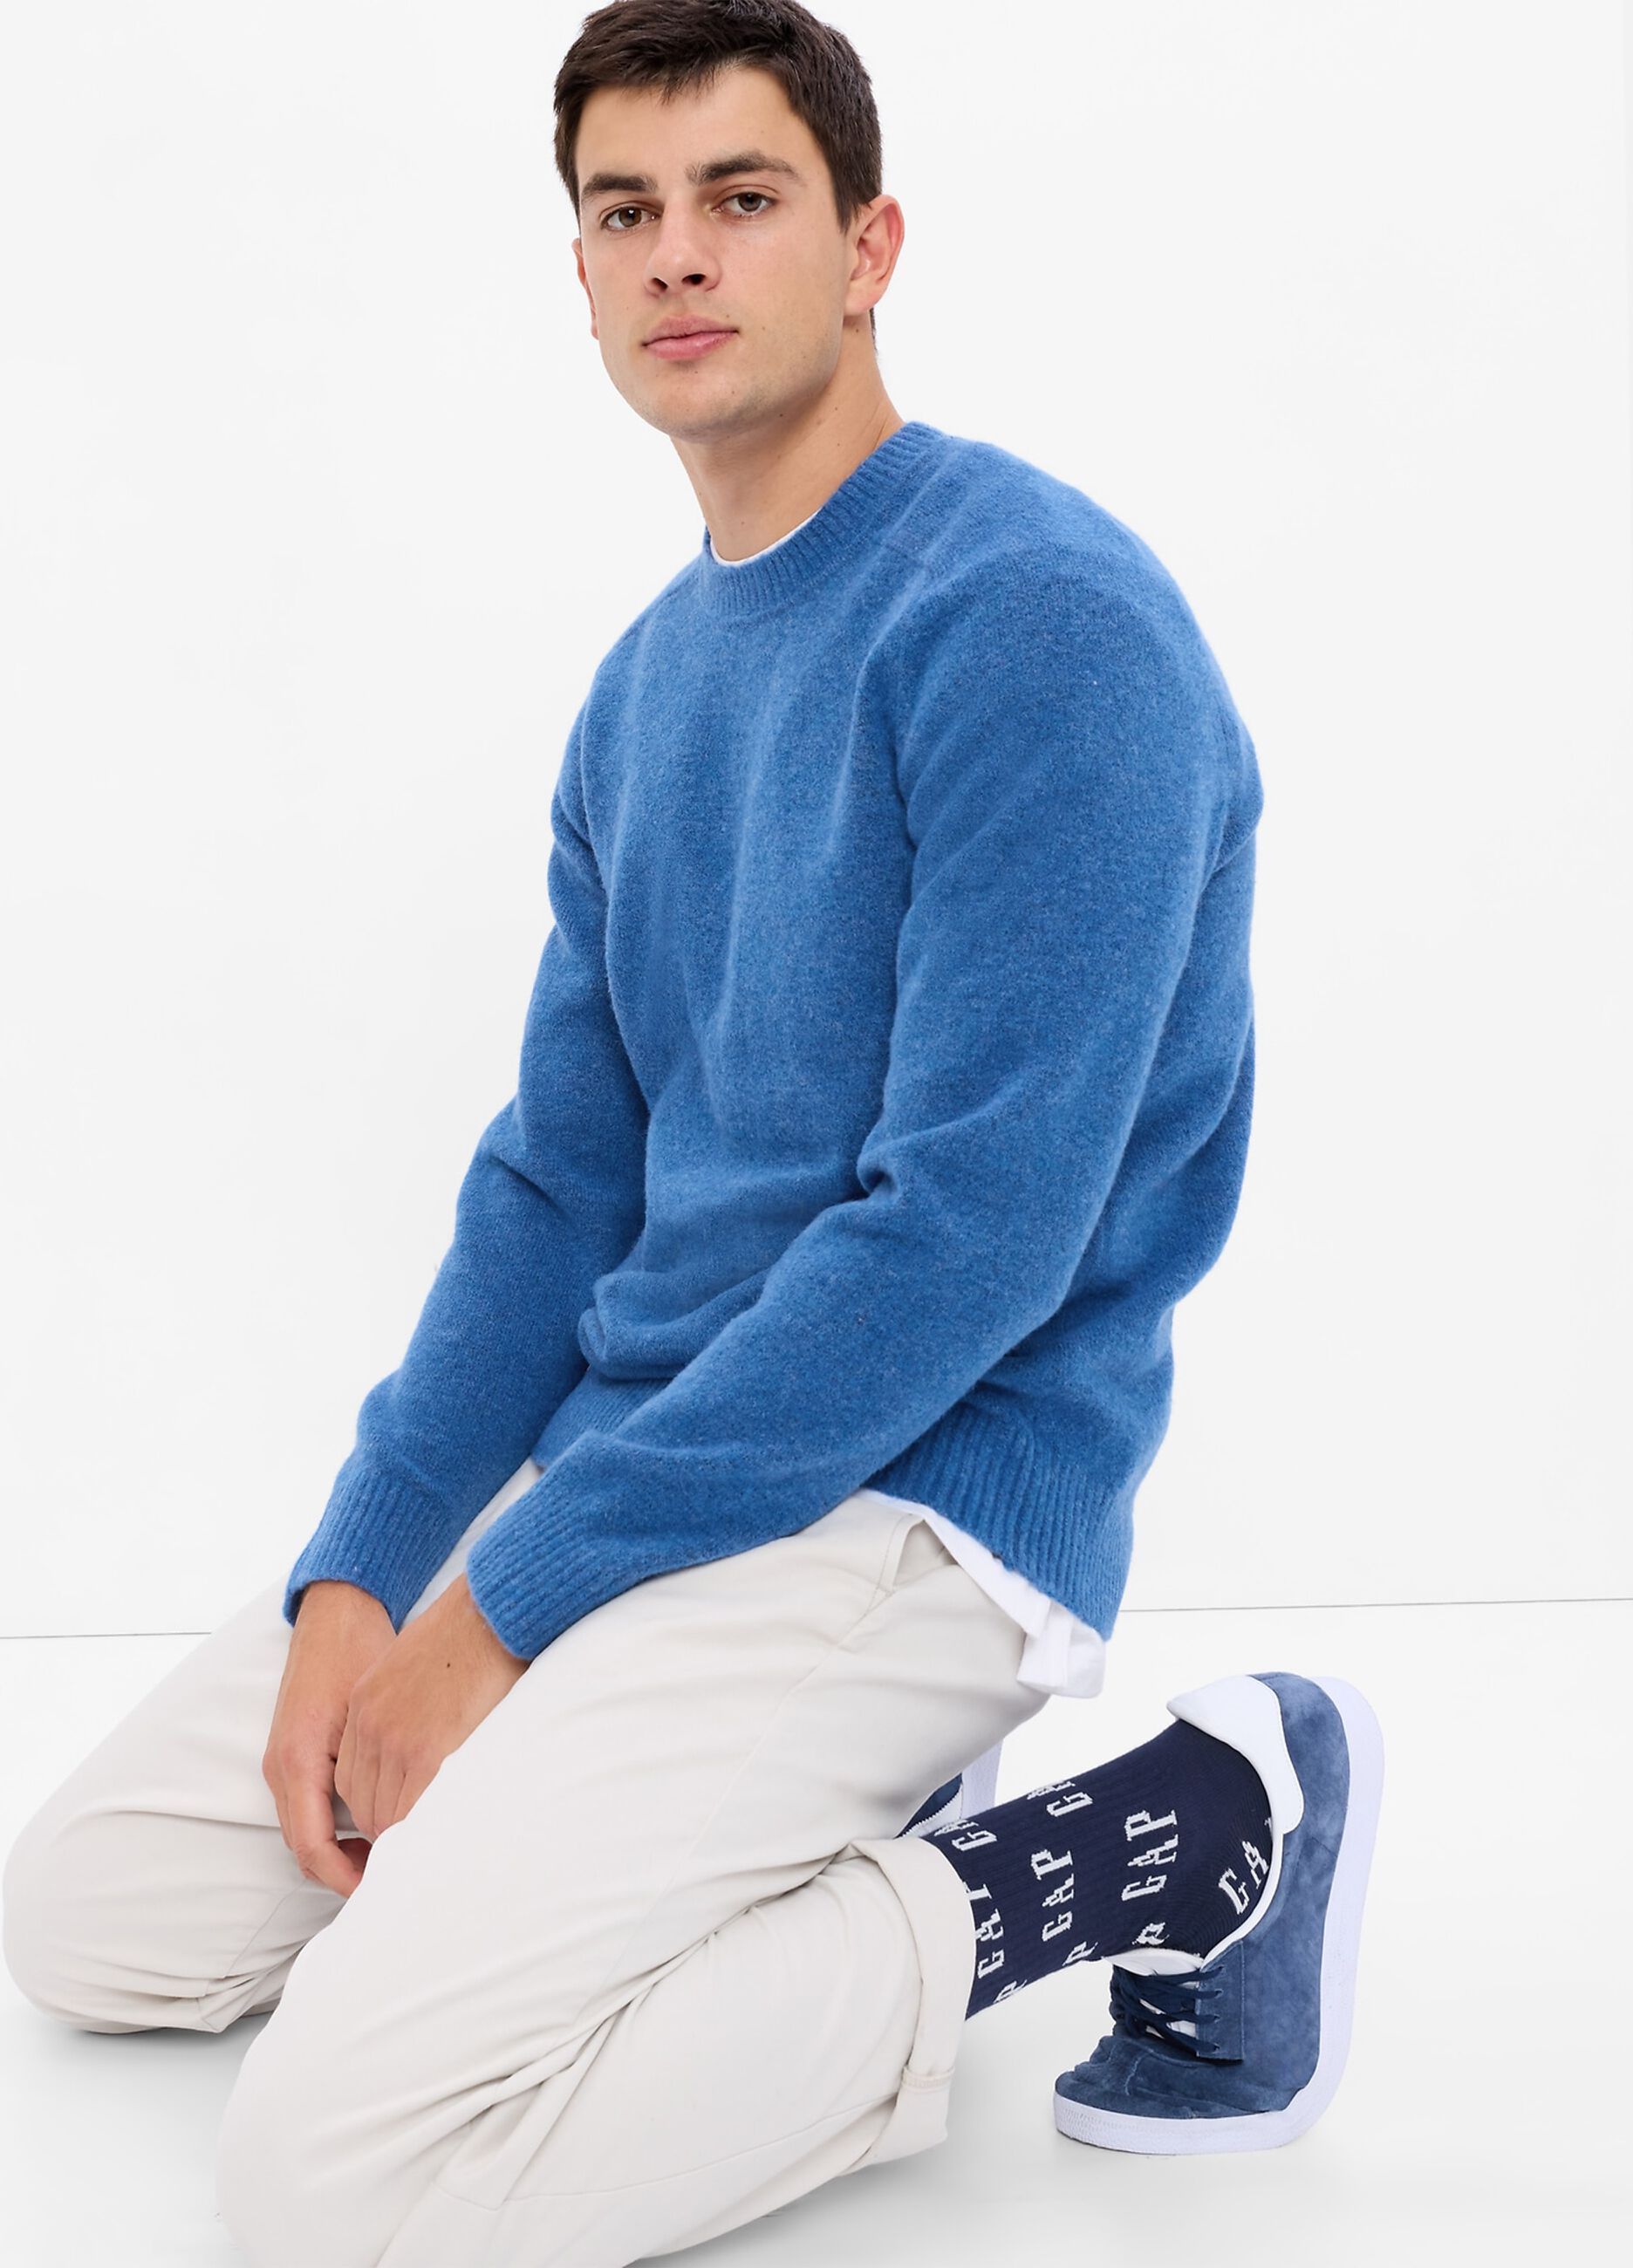 Round neck pullover with raglan sleeves.